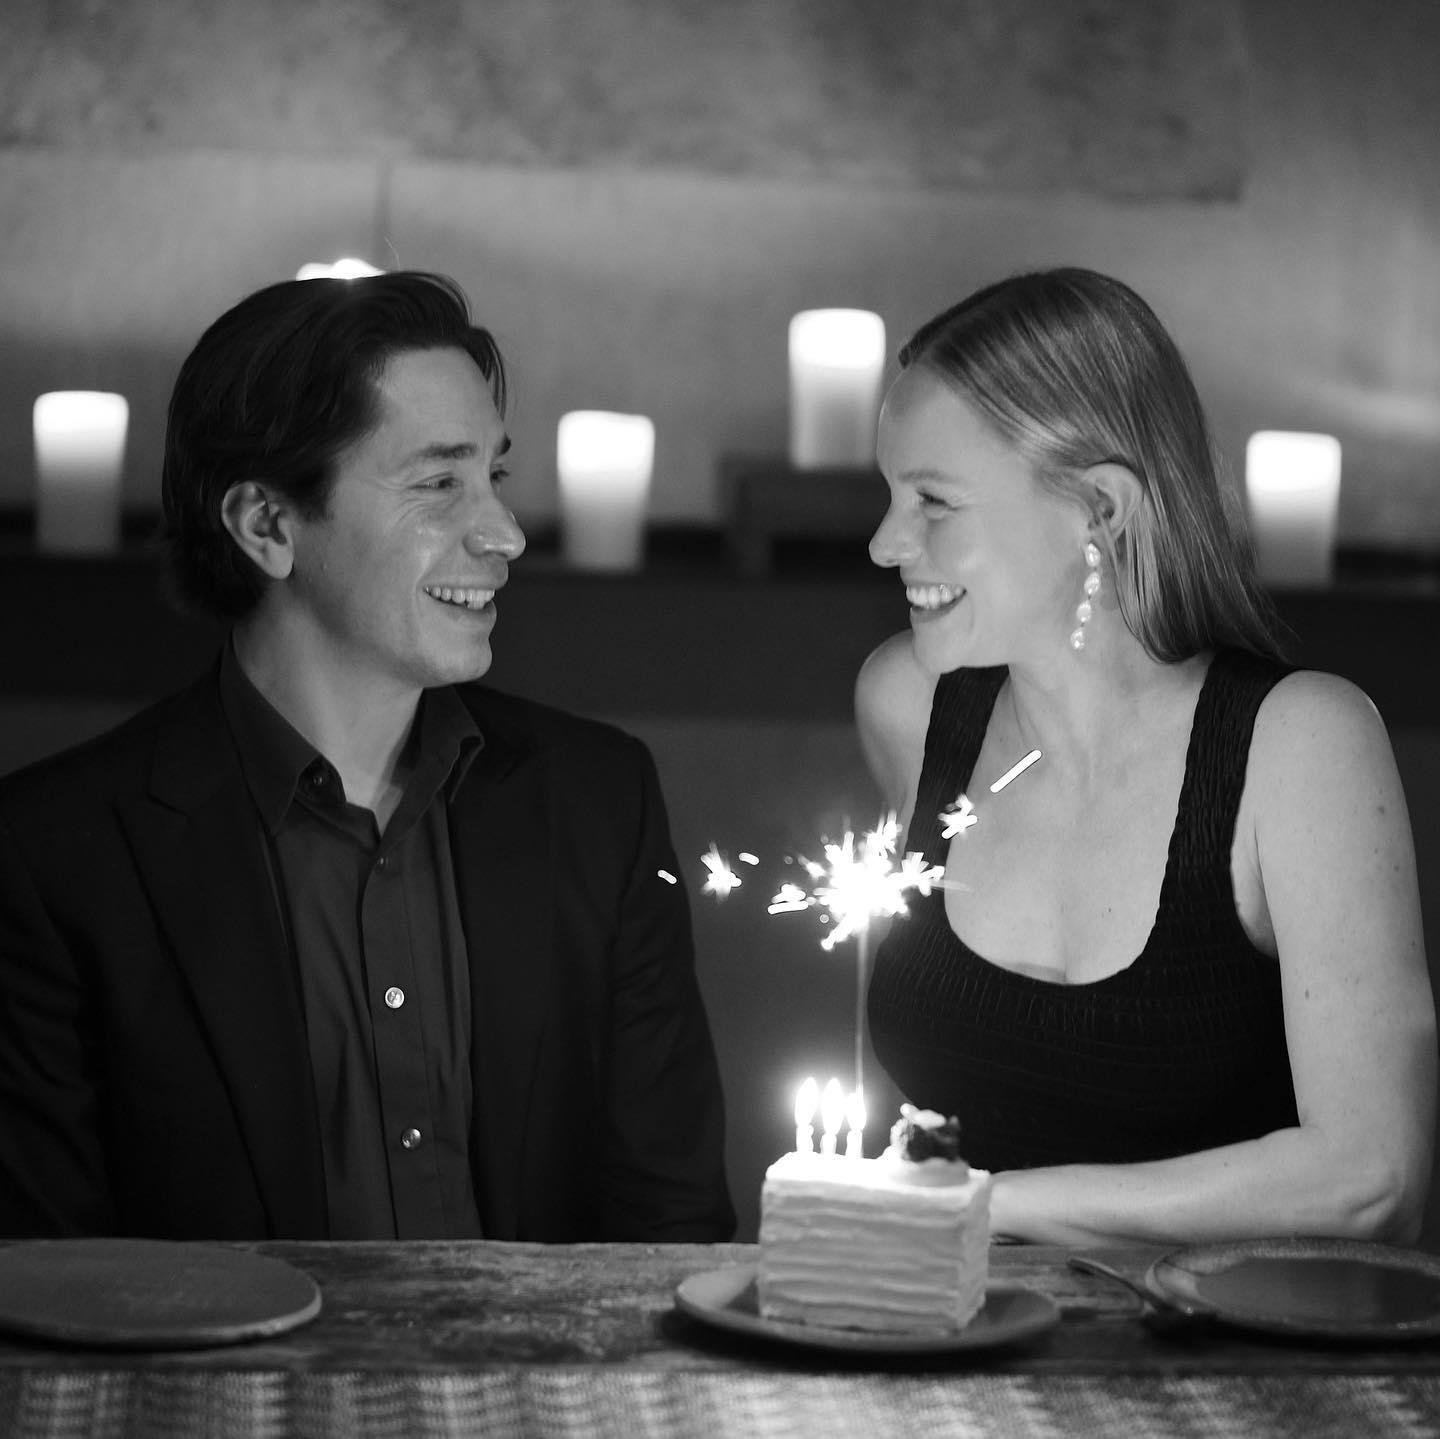 Justin Long poses with Kate Bosworth